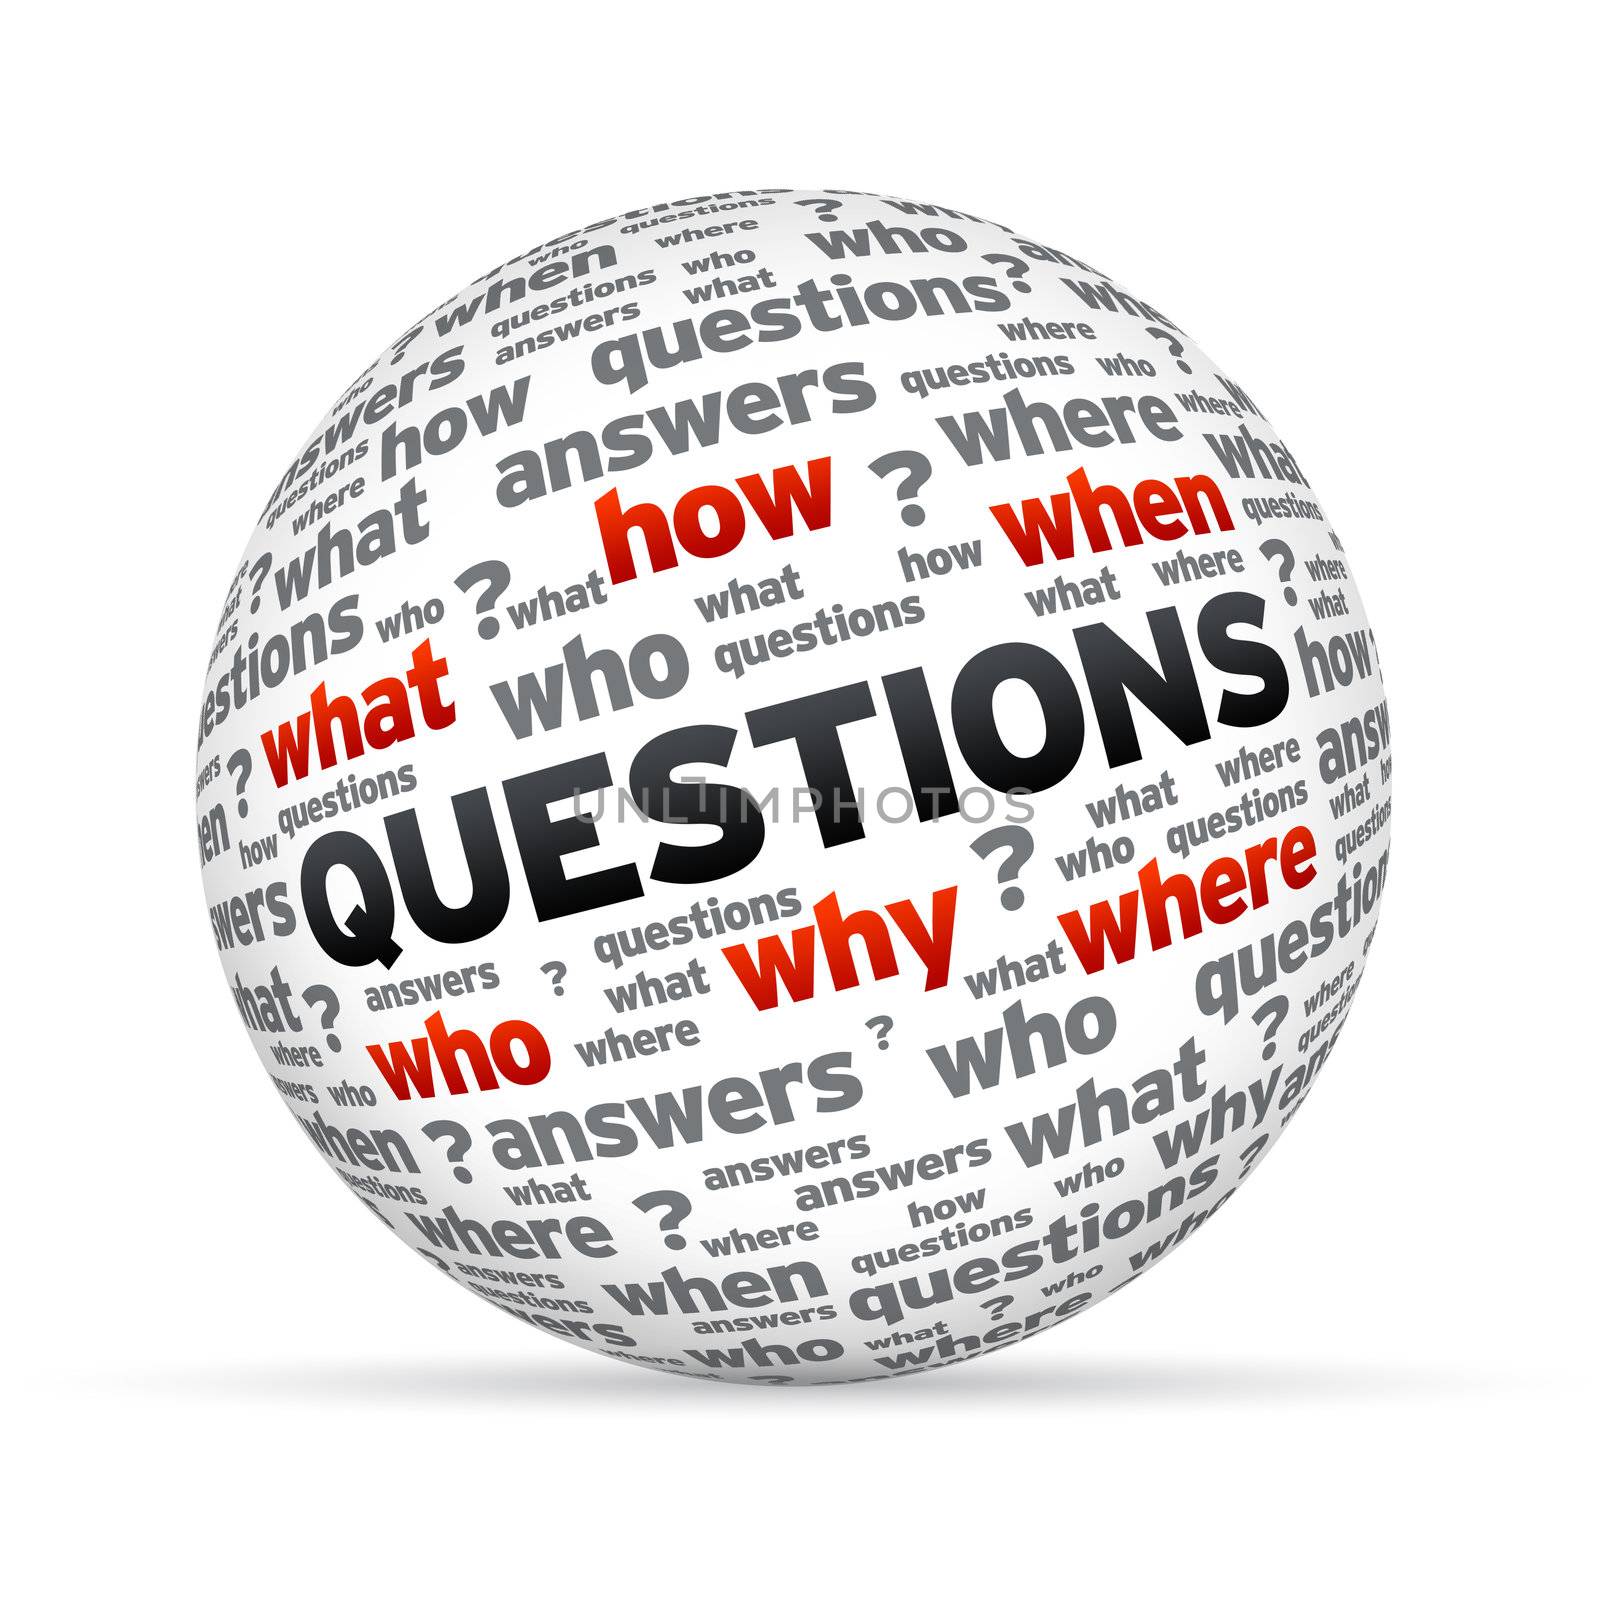 3D Questions sphere isoldated on white background.